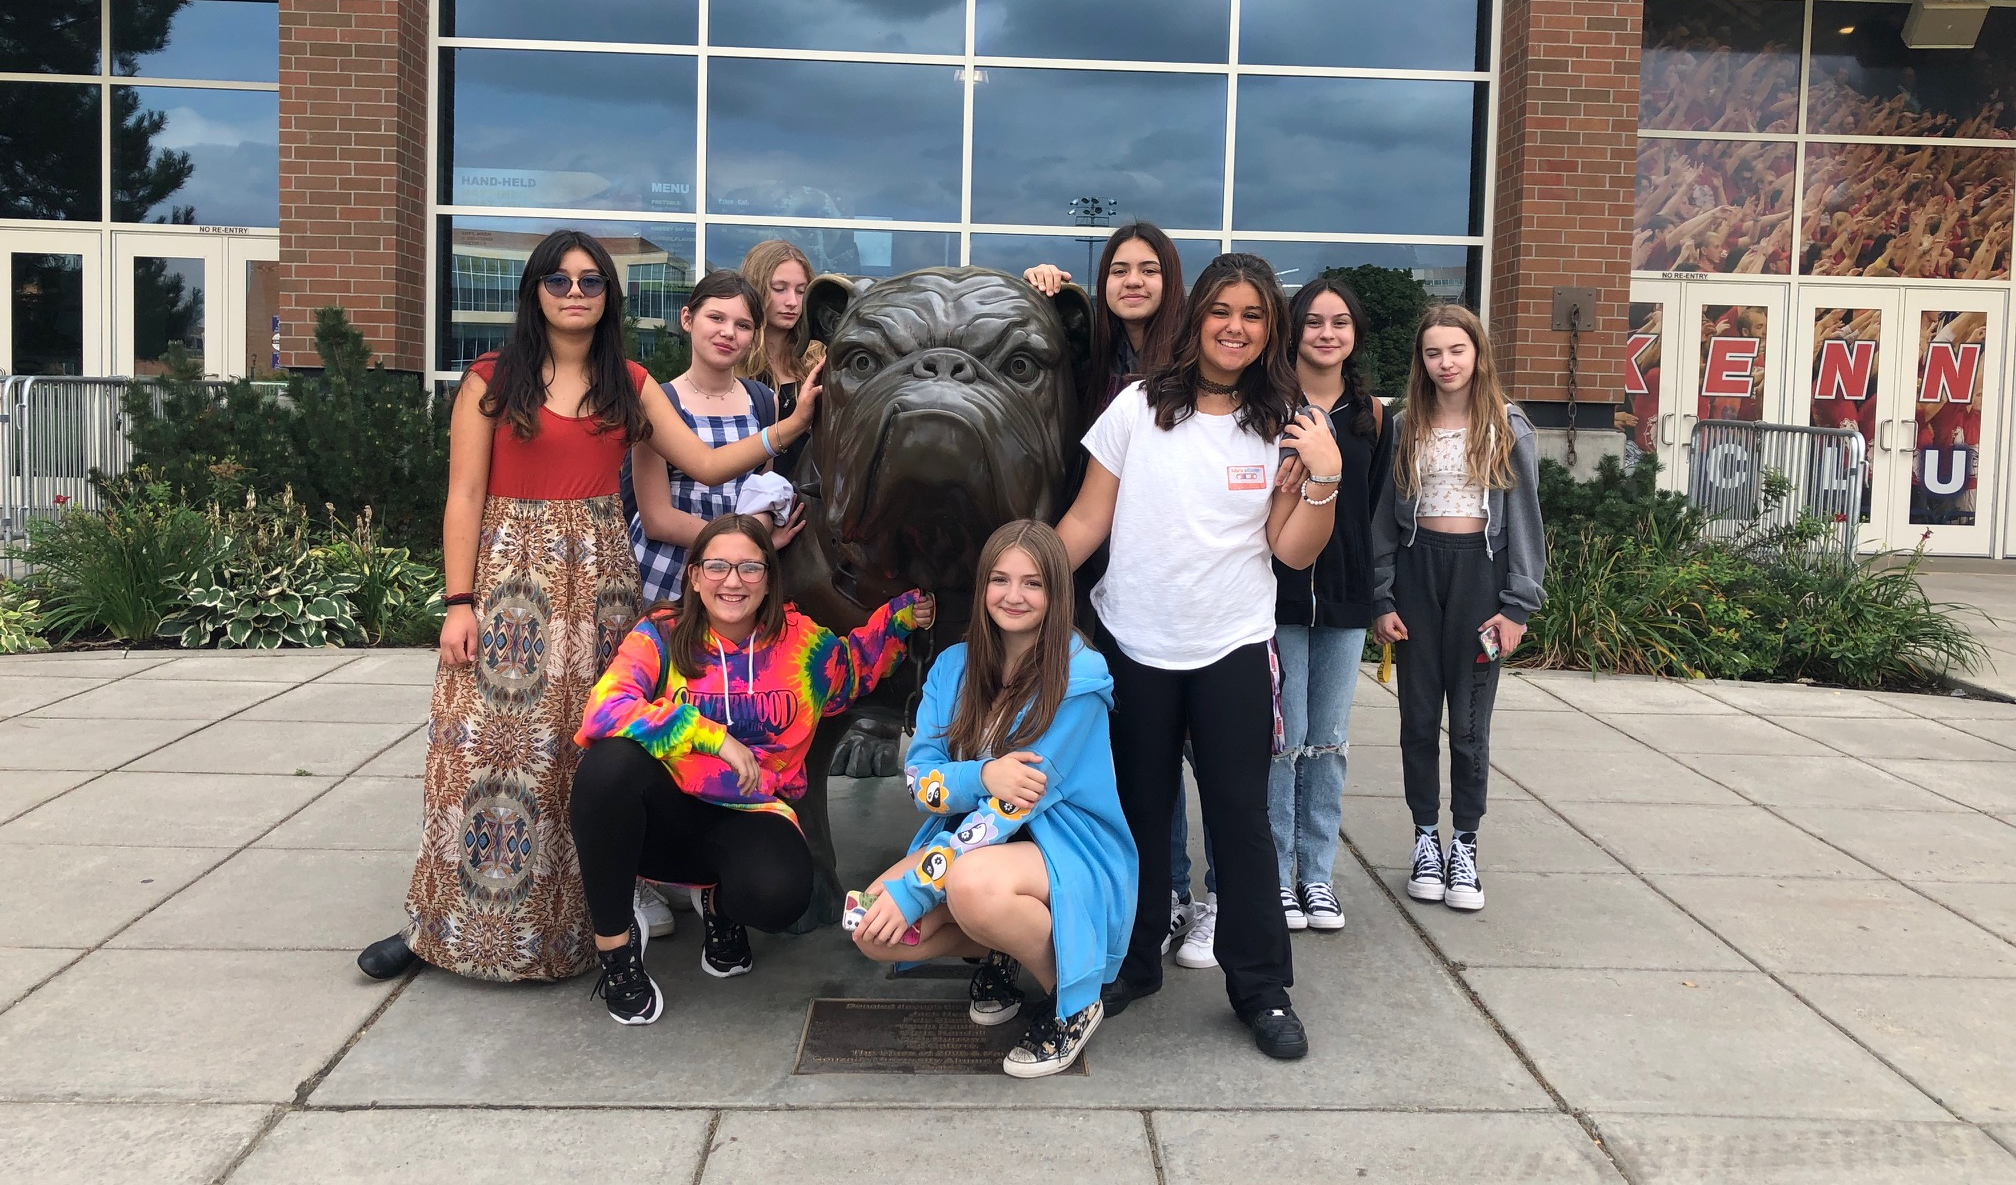 Students posing in front of bulldog statue